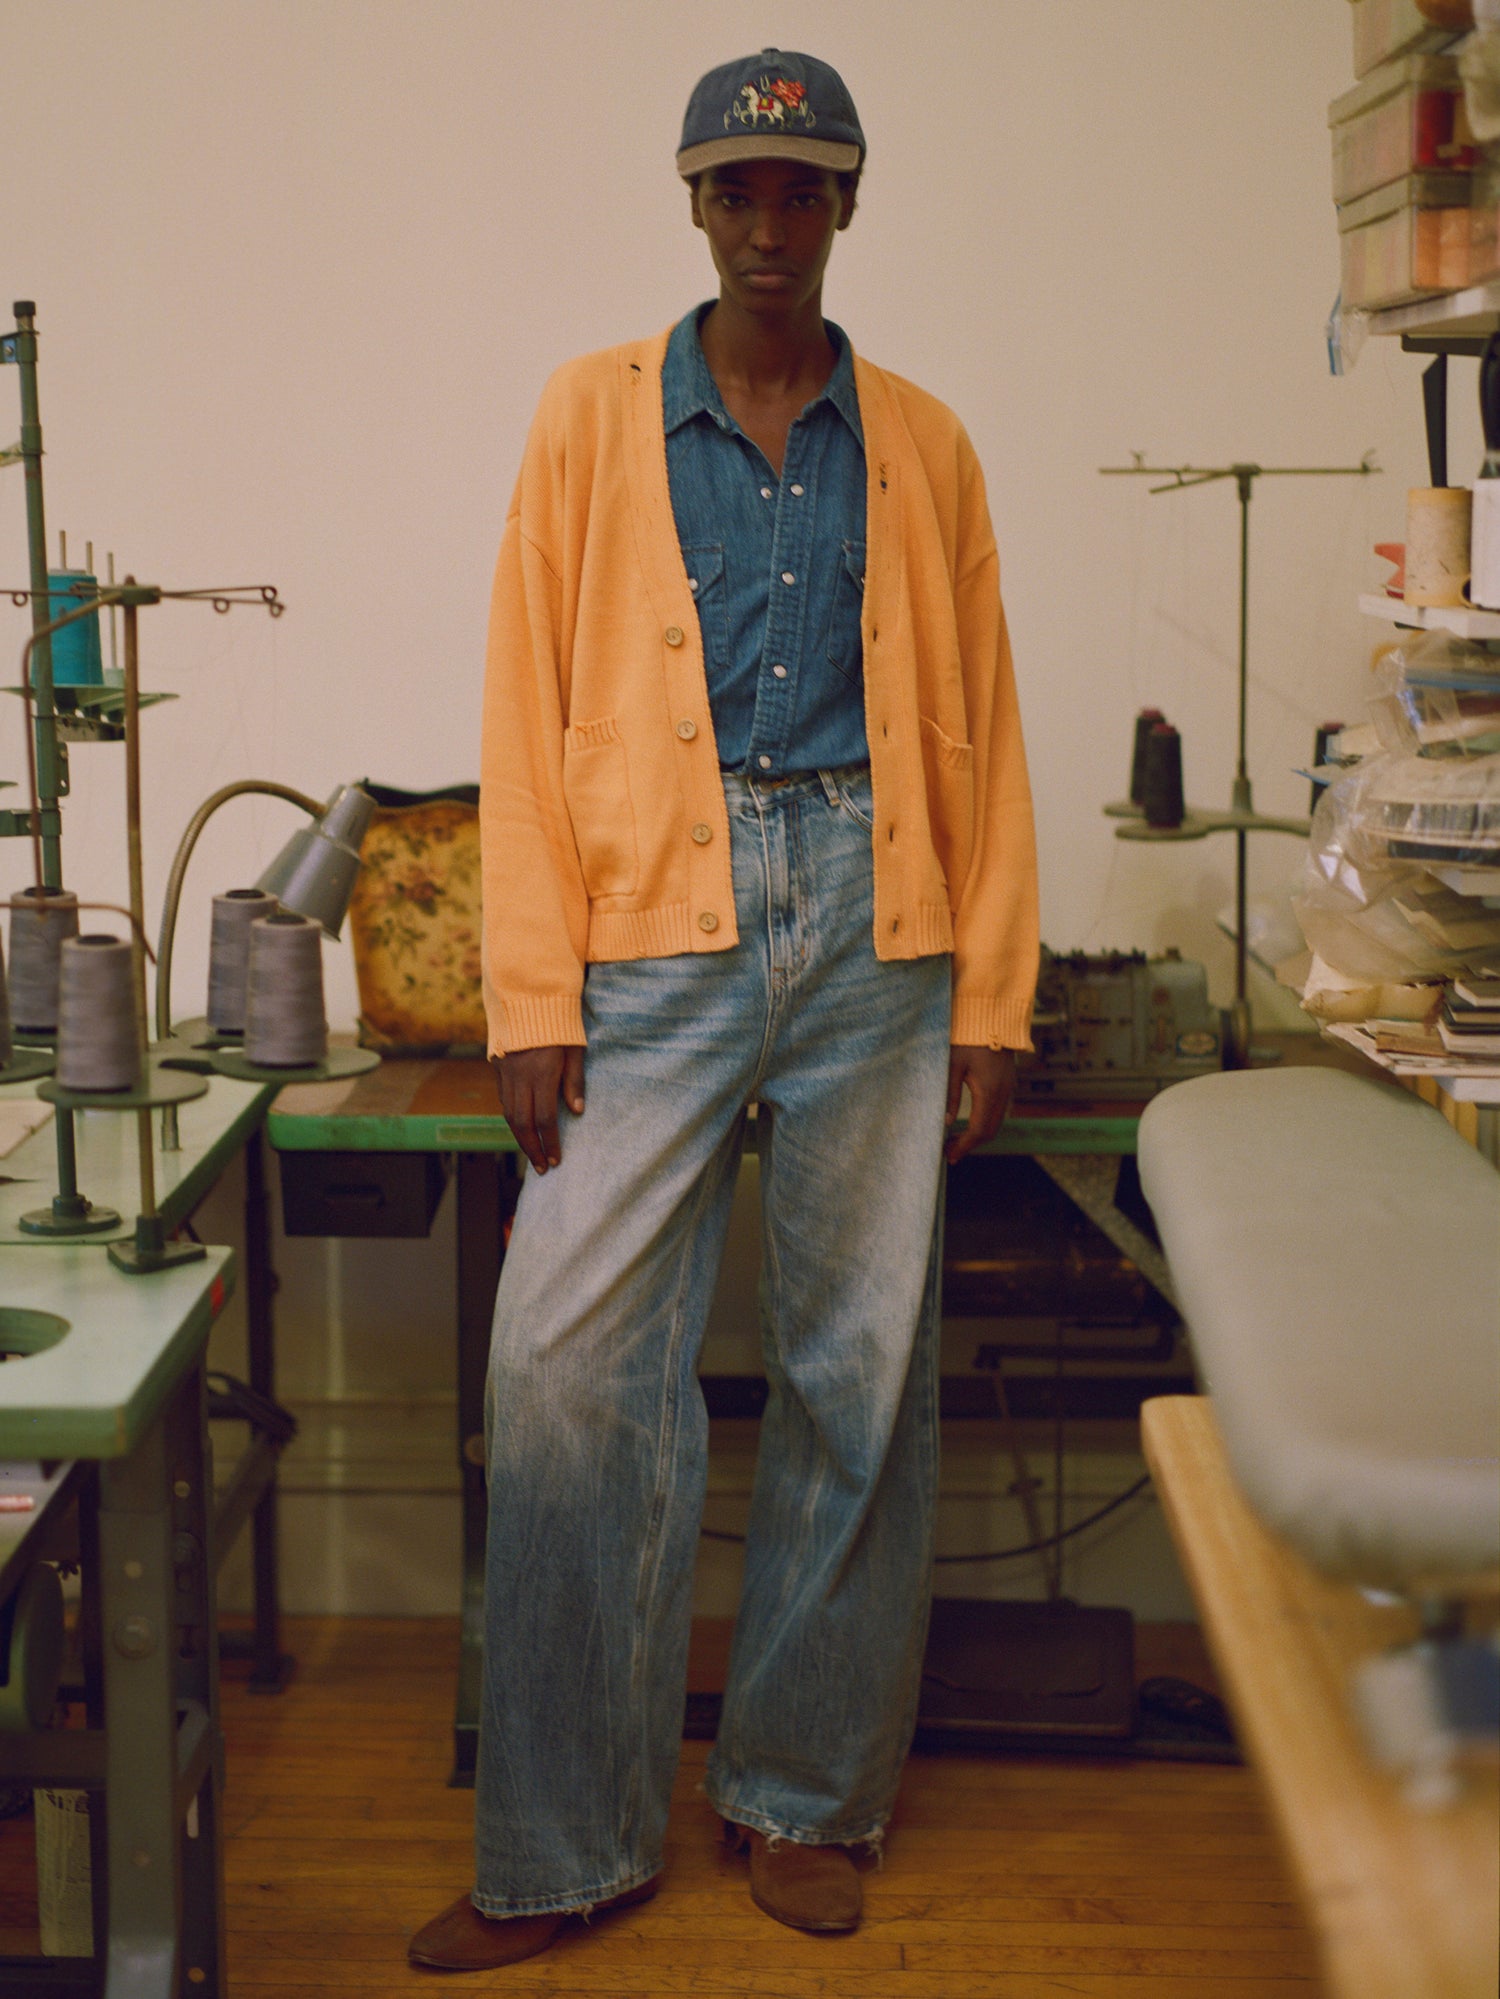 A man in jeans and a hat, wearing a Cadmium Distressed Cardigan sweater by Found, standing in a workshop.